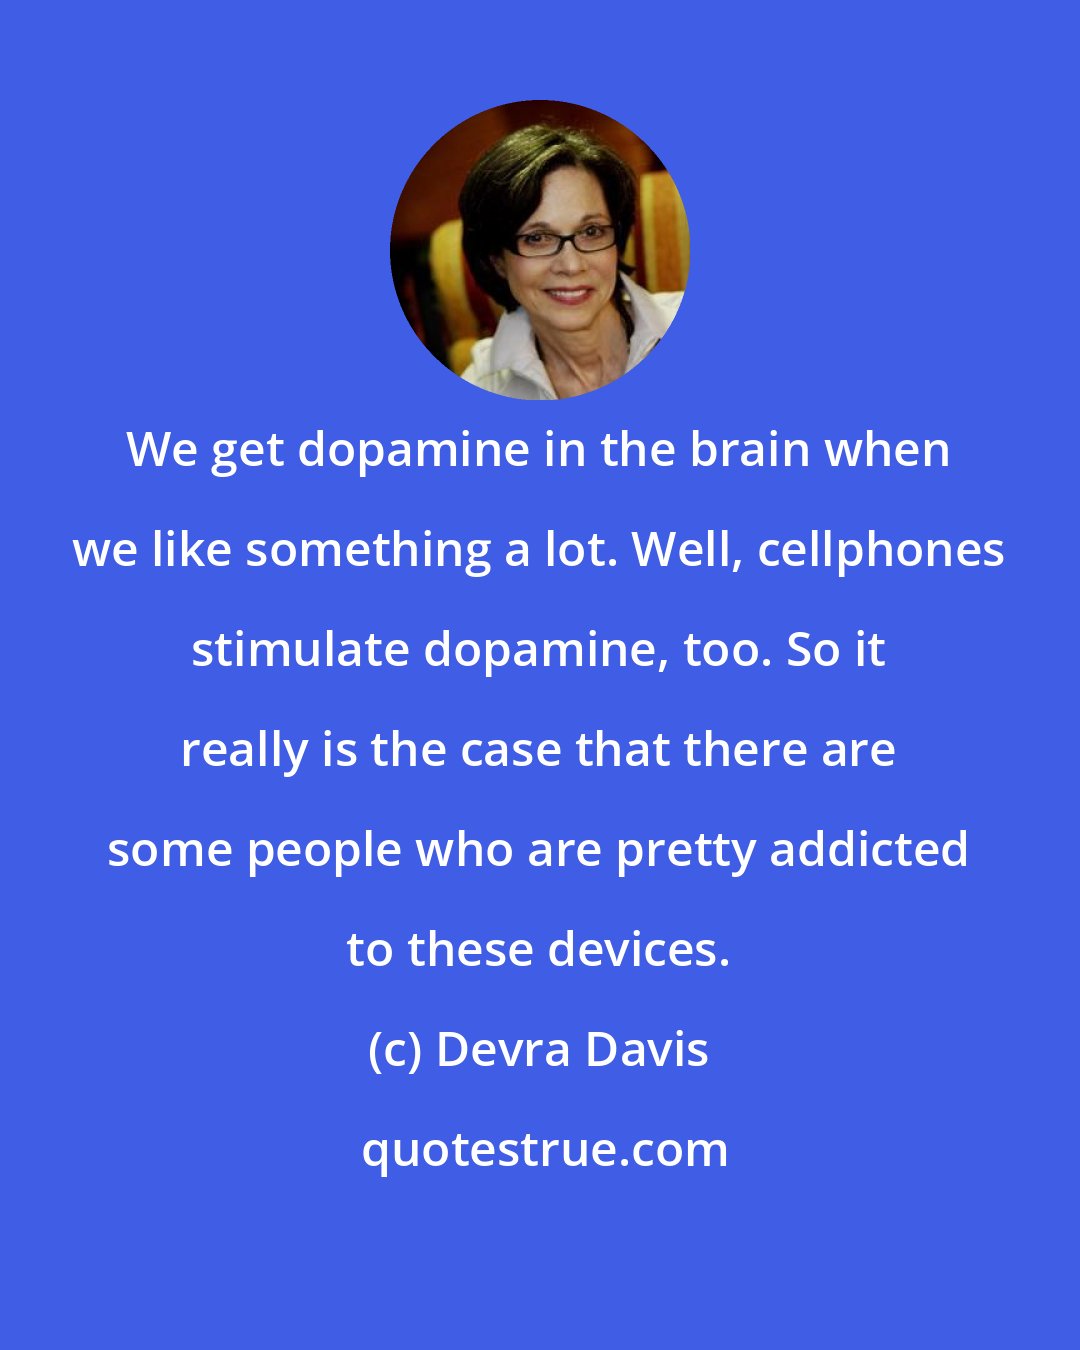 Devra Davis: We get dopamine in the brain when we like something a lot. Well, cellphones stimulate dopamine, too. So it really is the case that there are some people who are pretty addicted to these devices.